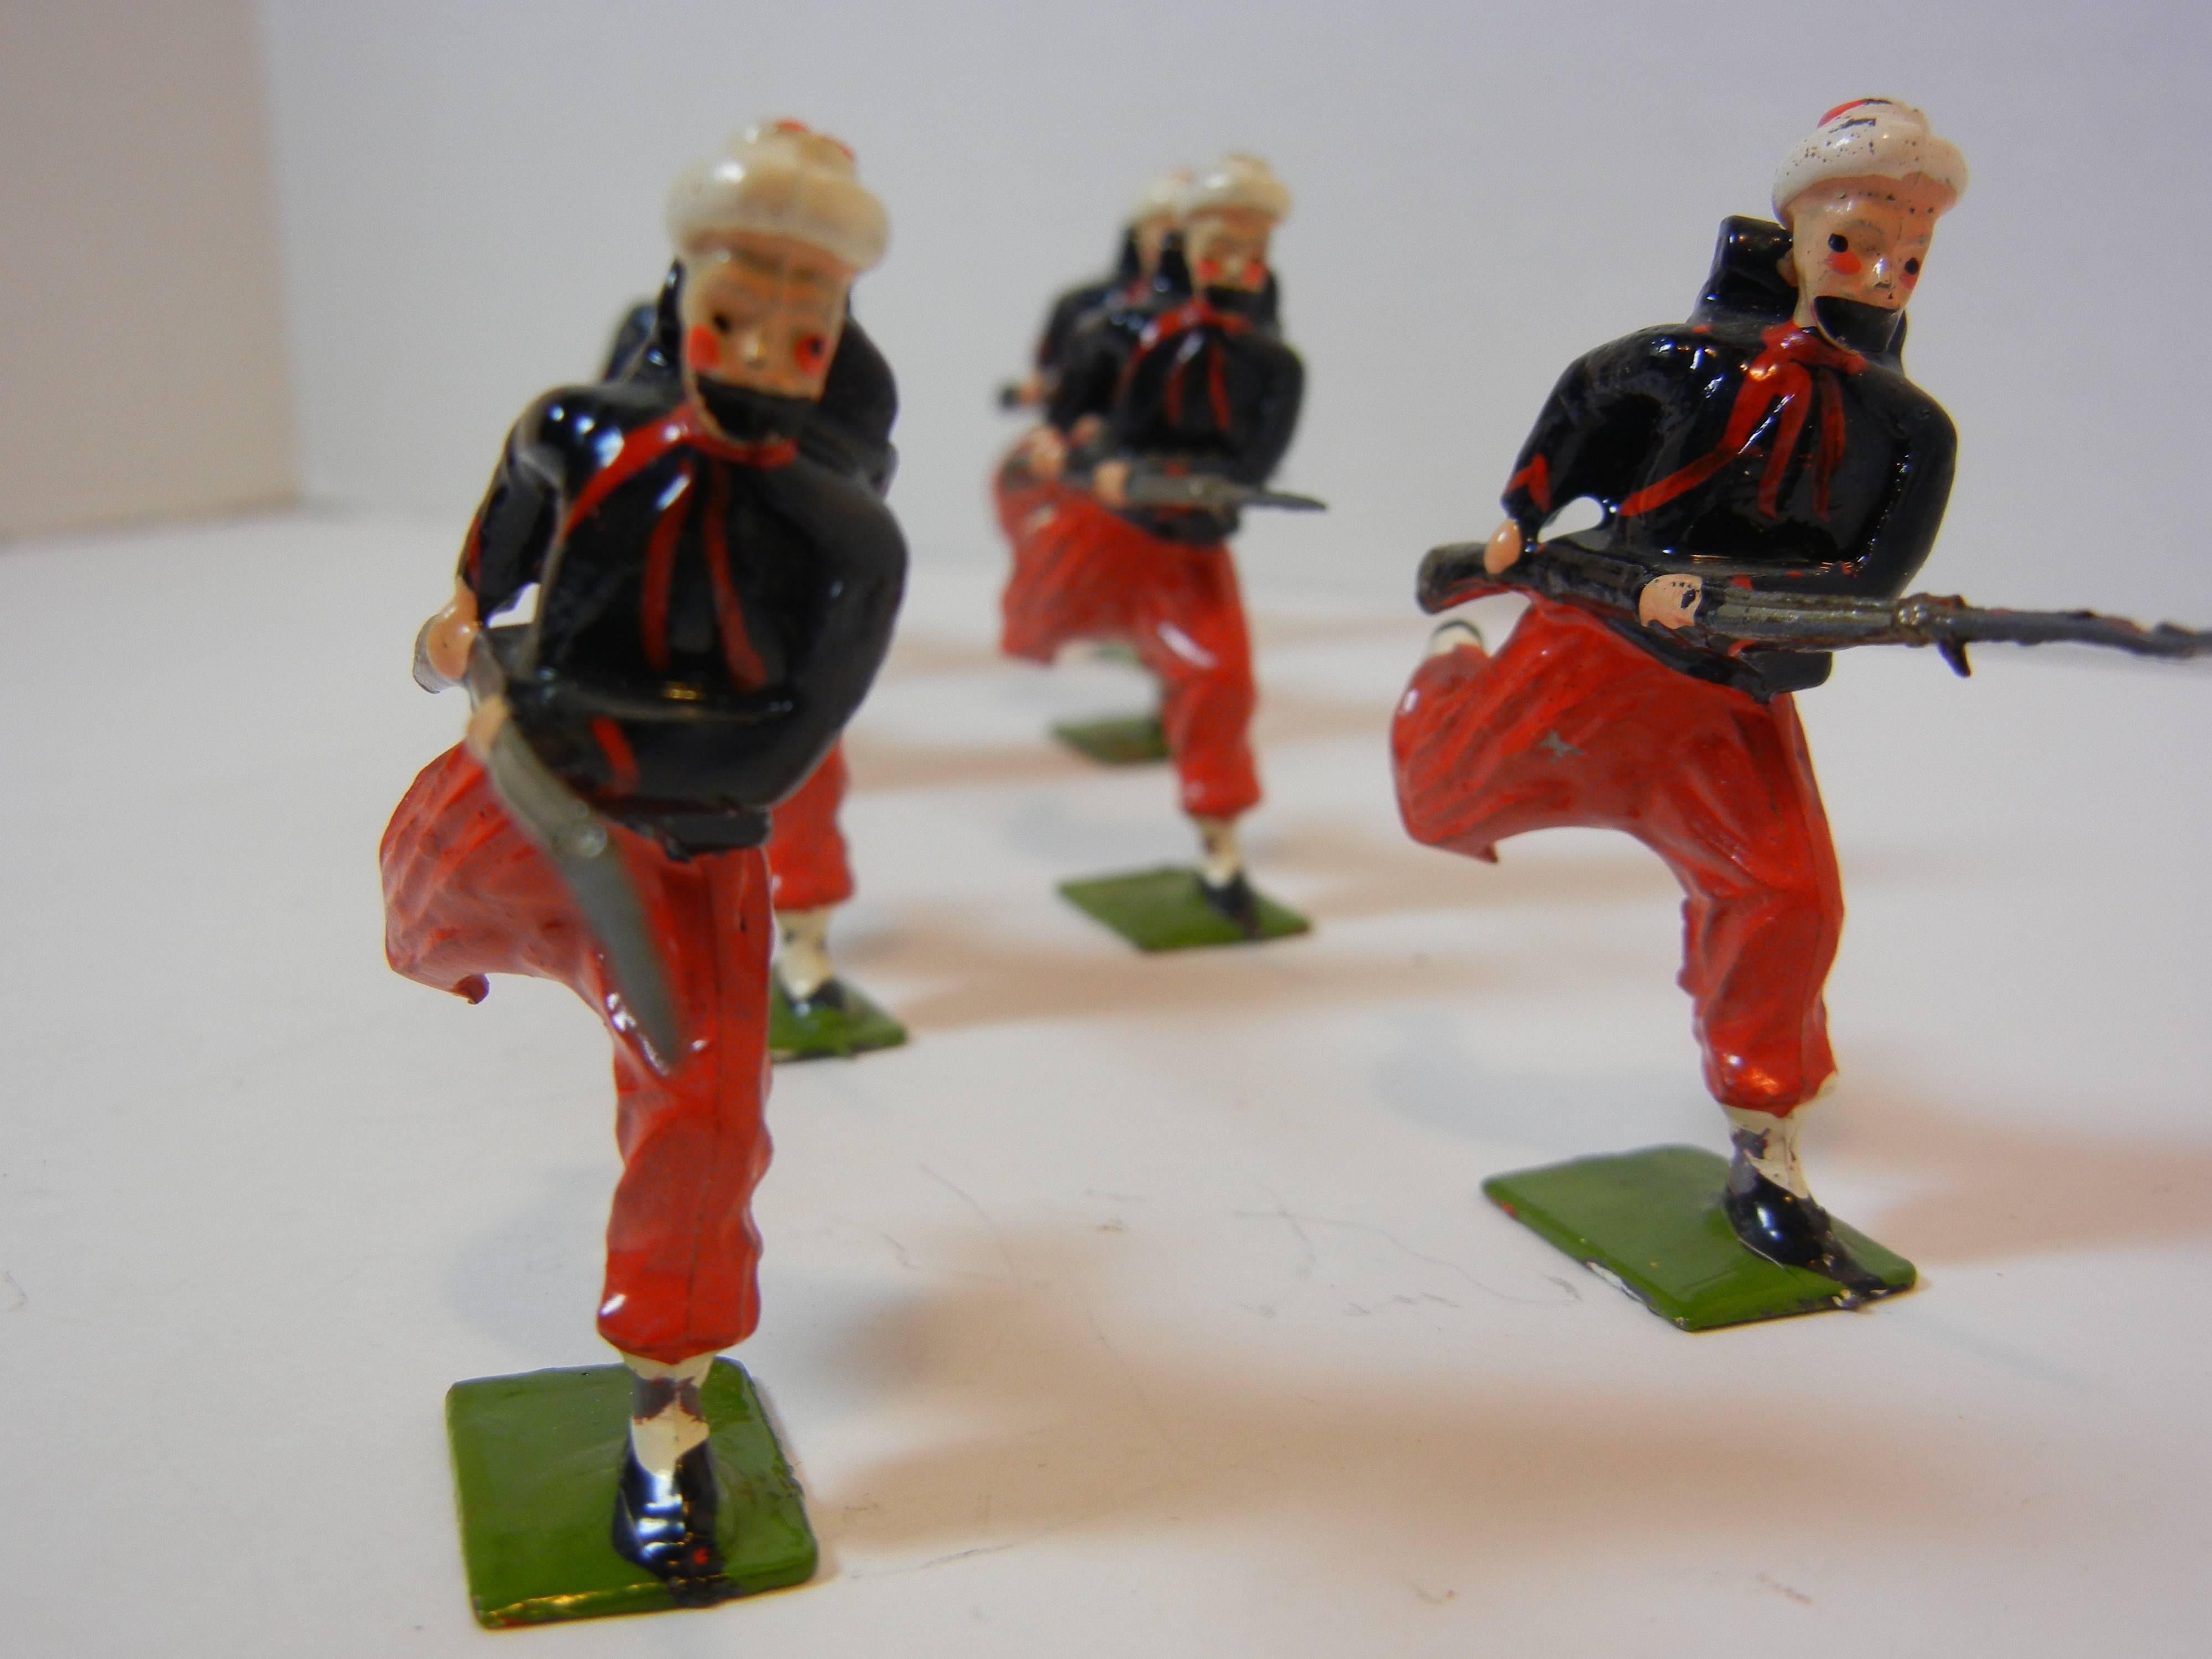 This lead-alloy set of toy soldiers is by Britains LTD of London, UK. It is an historically accurate depiction in hand-painted hollow-cast lead alloy, which was no longer legal to use in toys after 1966.

The set is all original. It was in